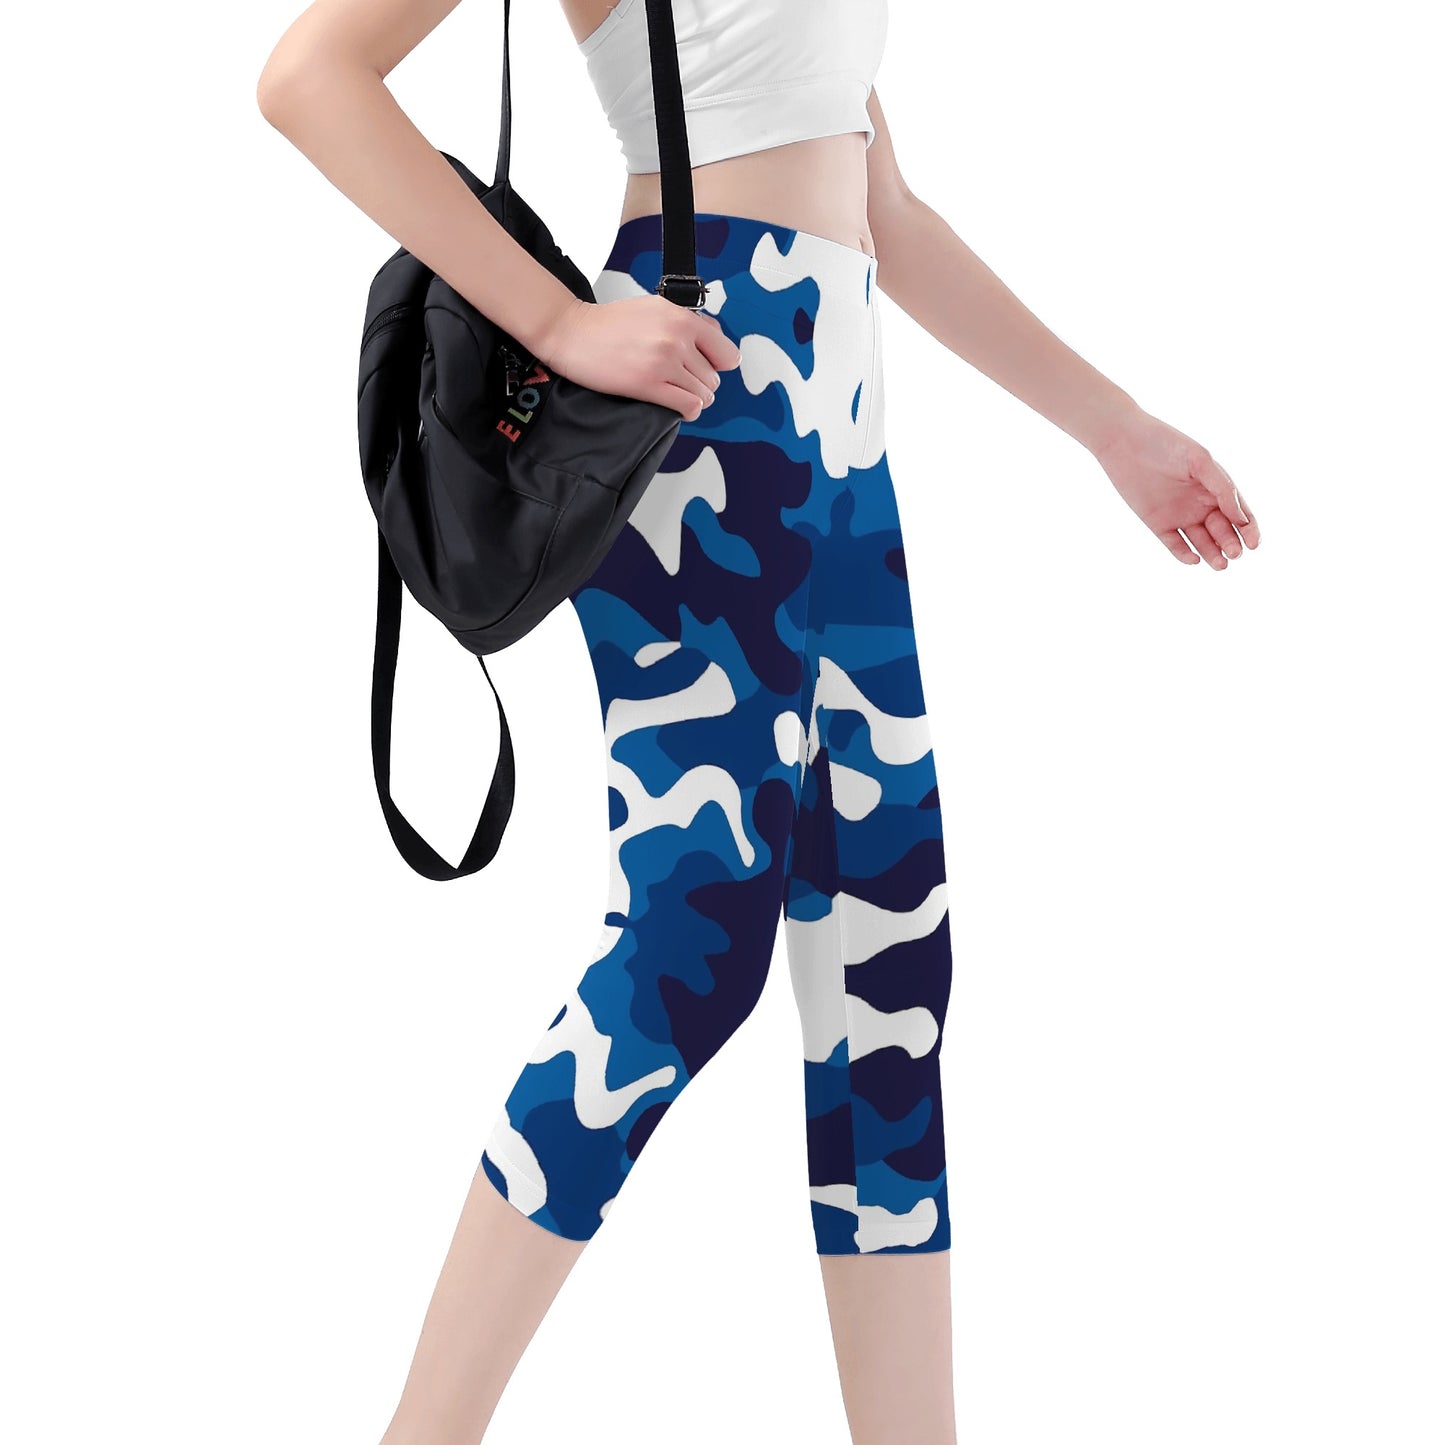 Stand out  with the  Nugget Army Medic Womens Capris  available at Hey Nugget. Grab yours today!